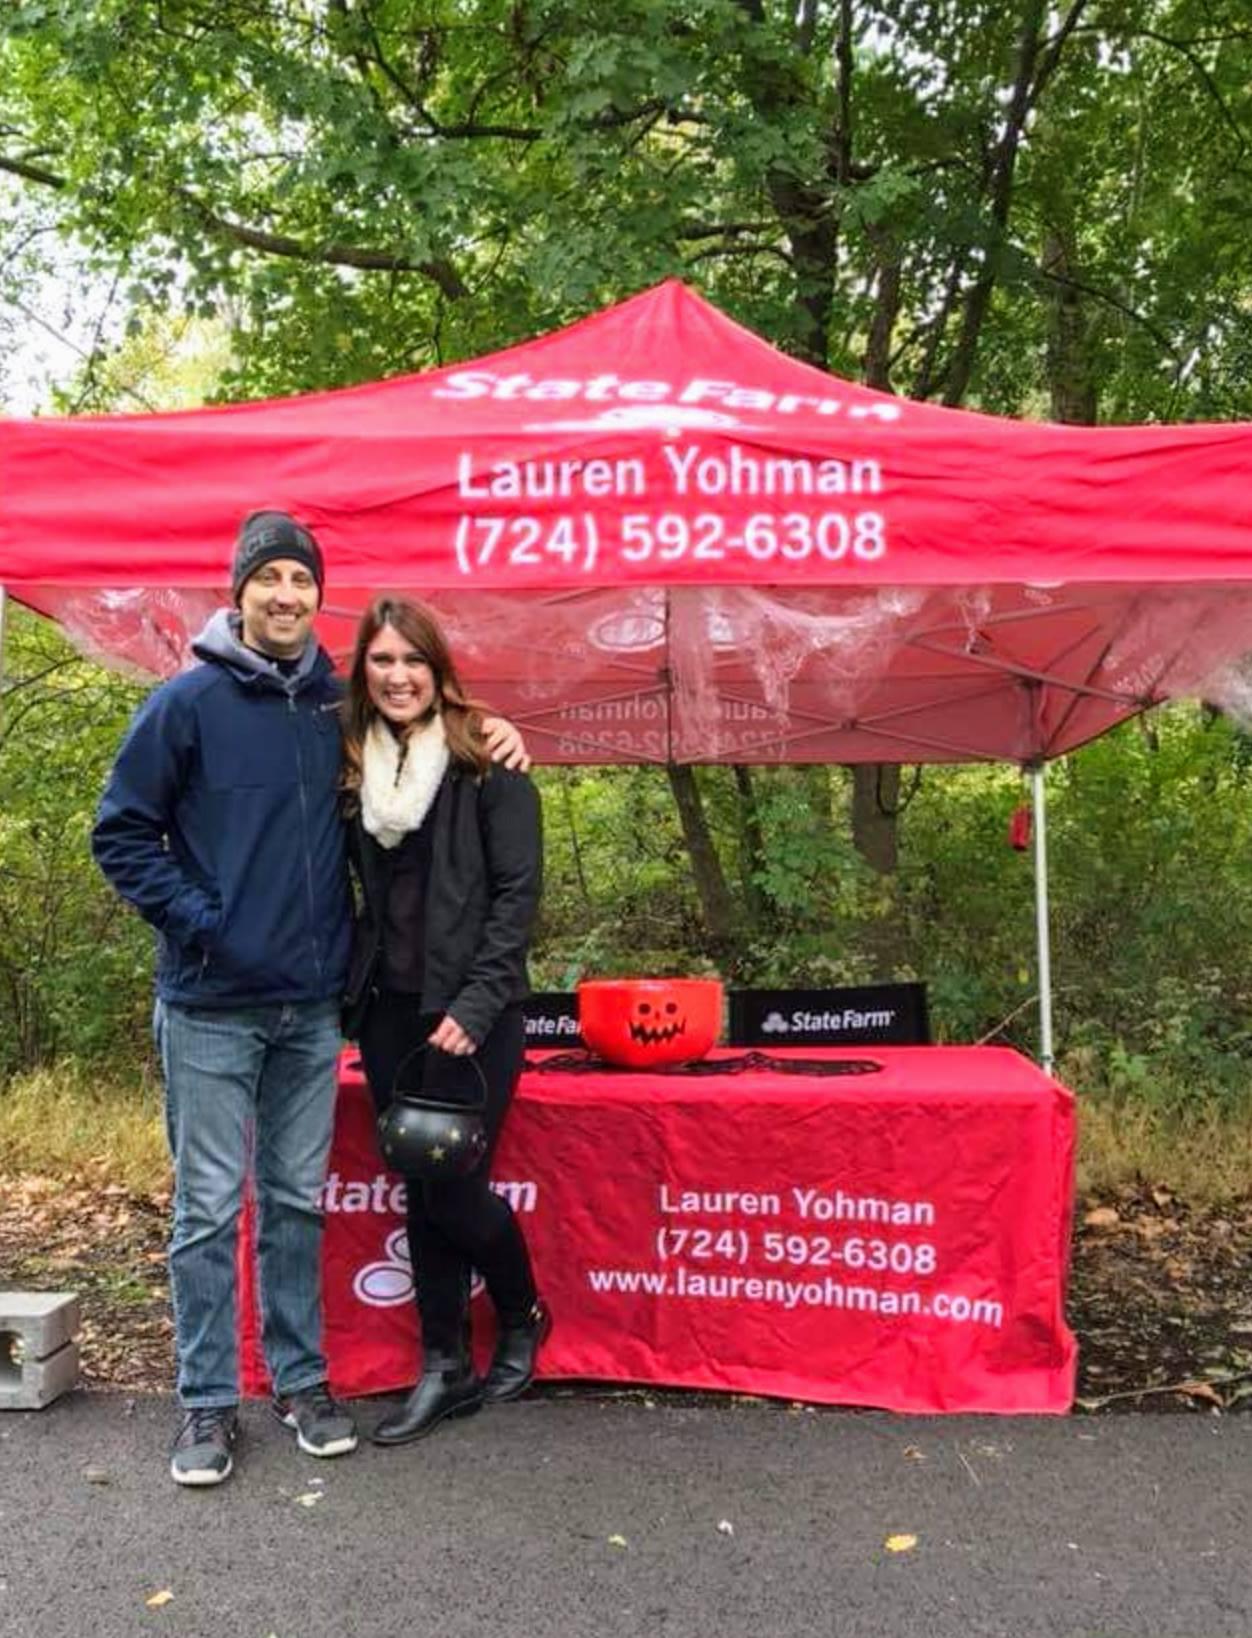 Engaging with our local community! Lauren Yohman - State Farm Insurance Agent Uniontown (724)592-6308